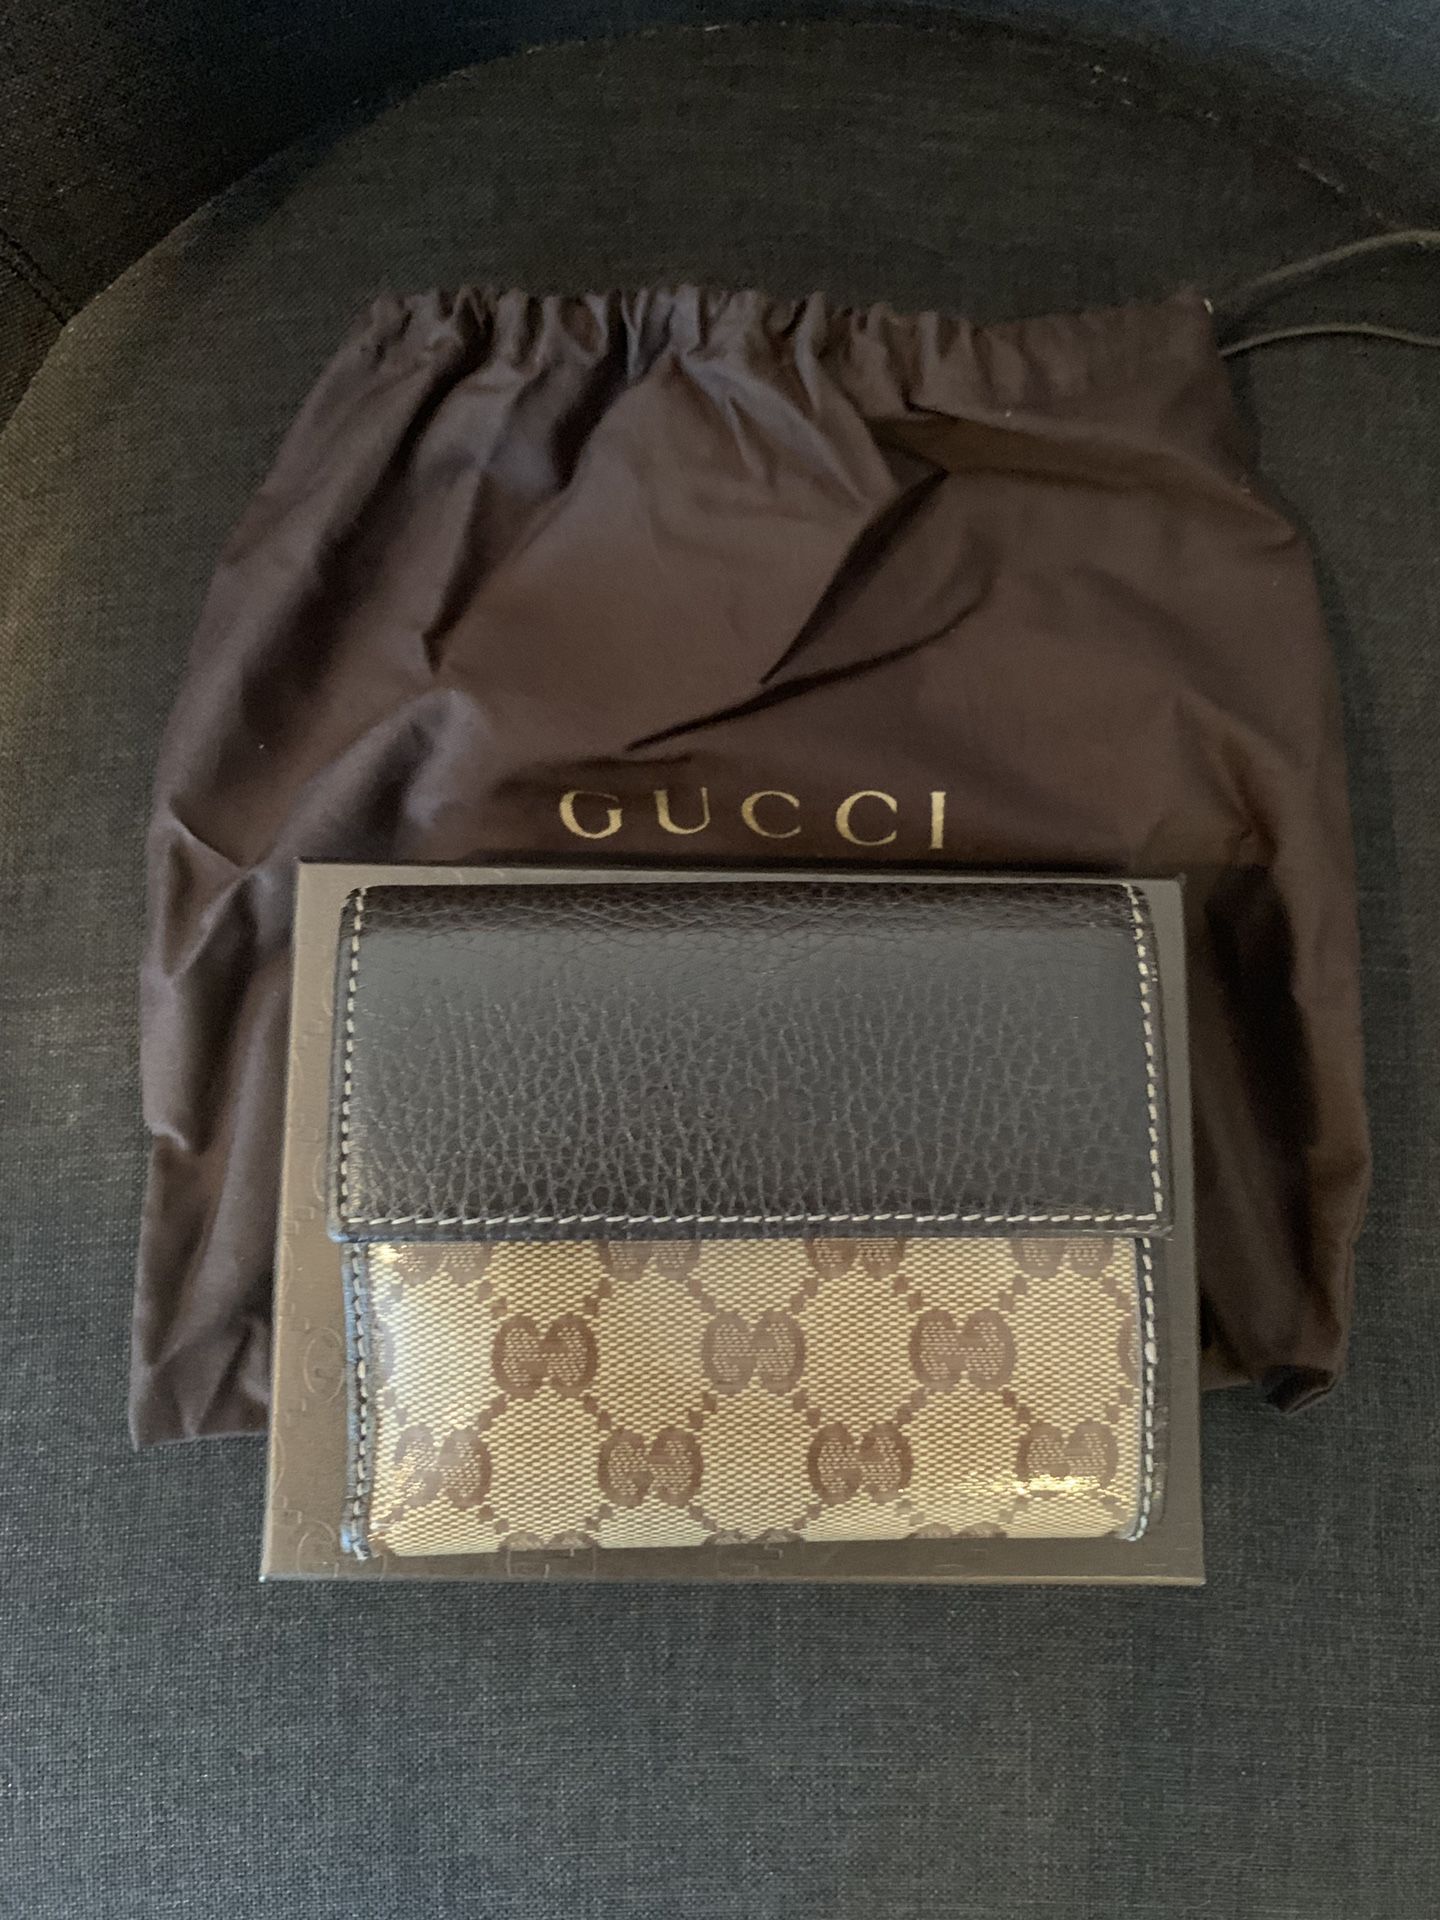 Authentic Gucci crystal wallet